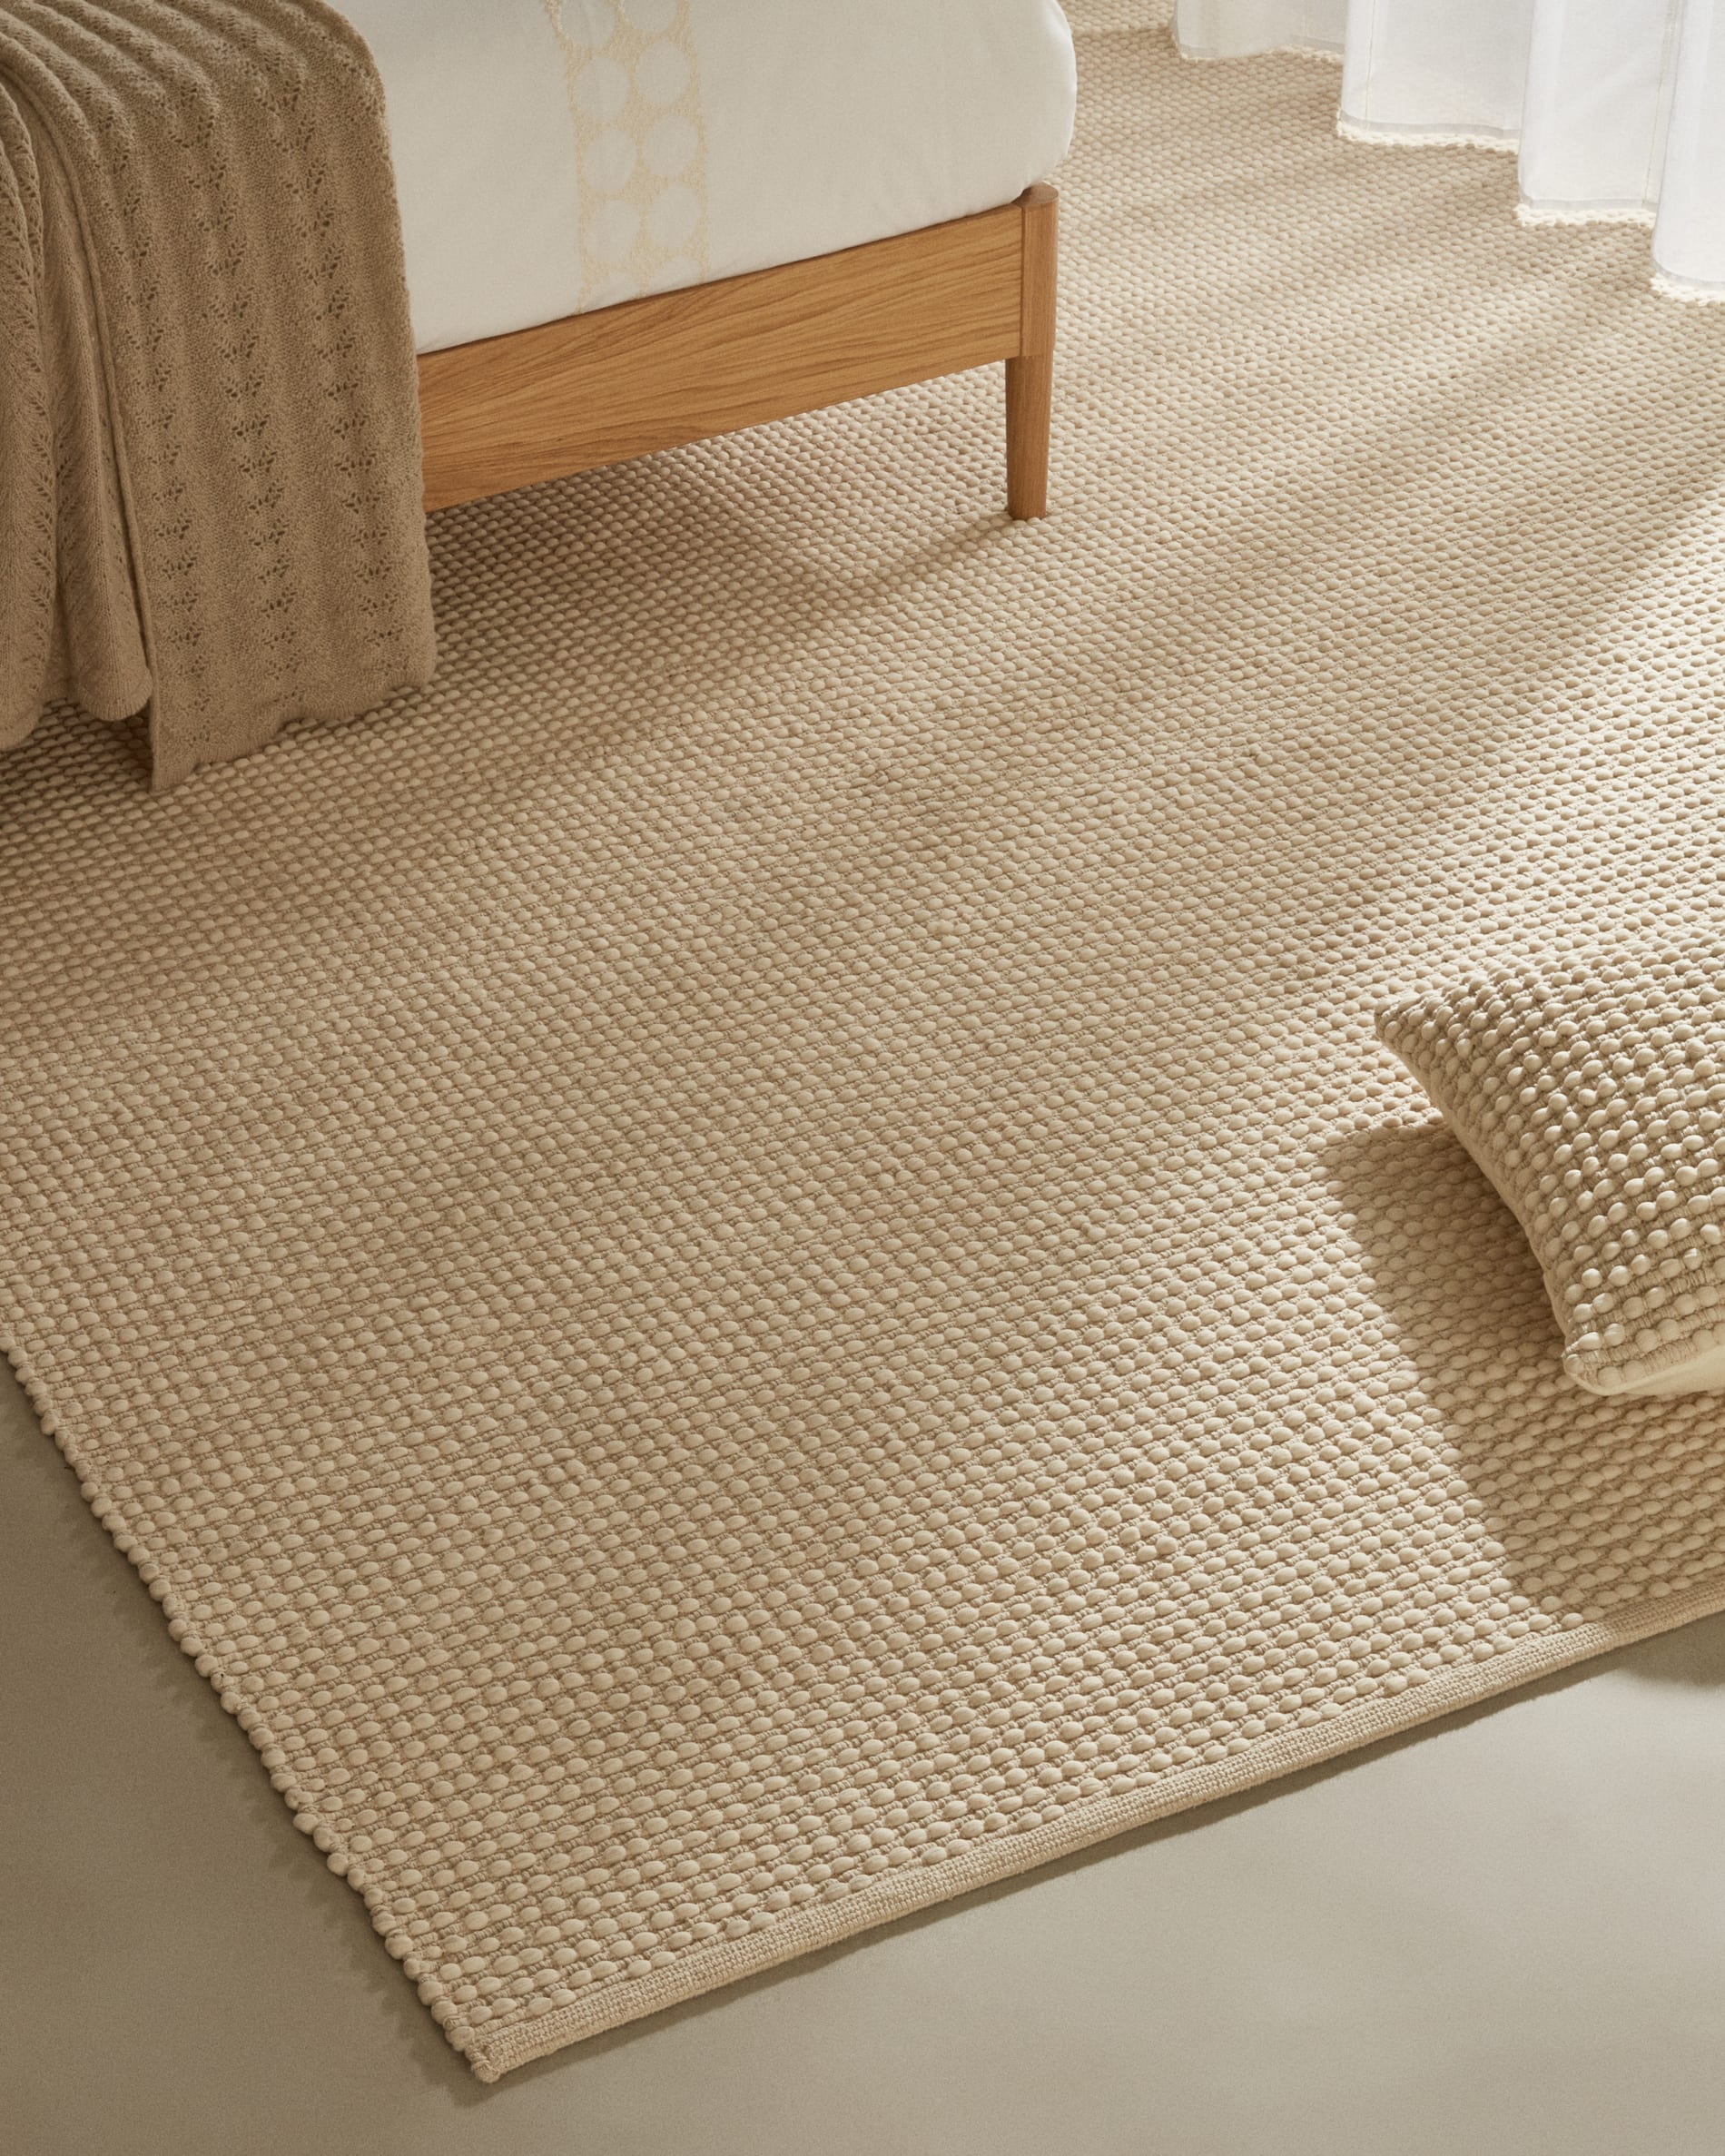 Mascarell rug, cotton and polypropylene in white, 200 x 300 cm